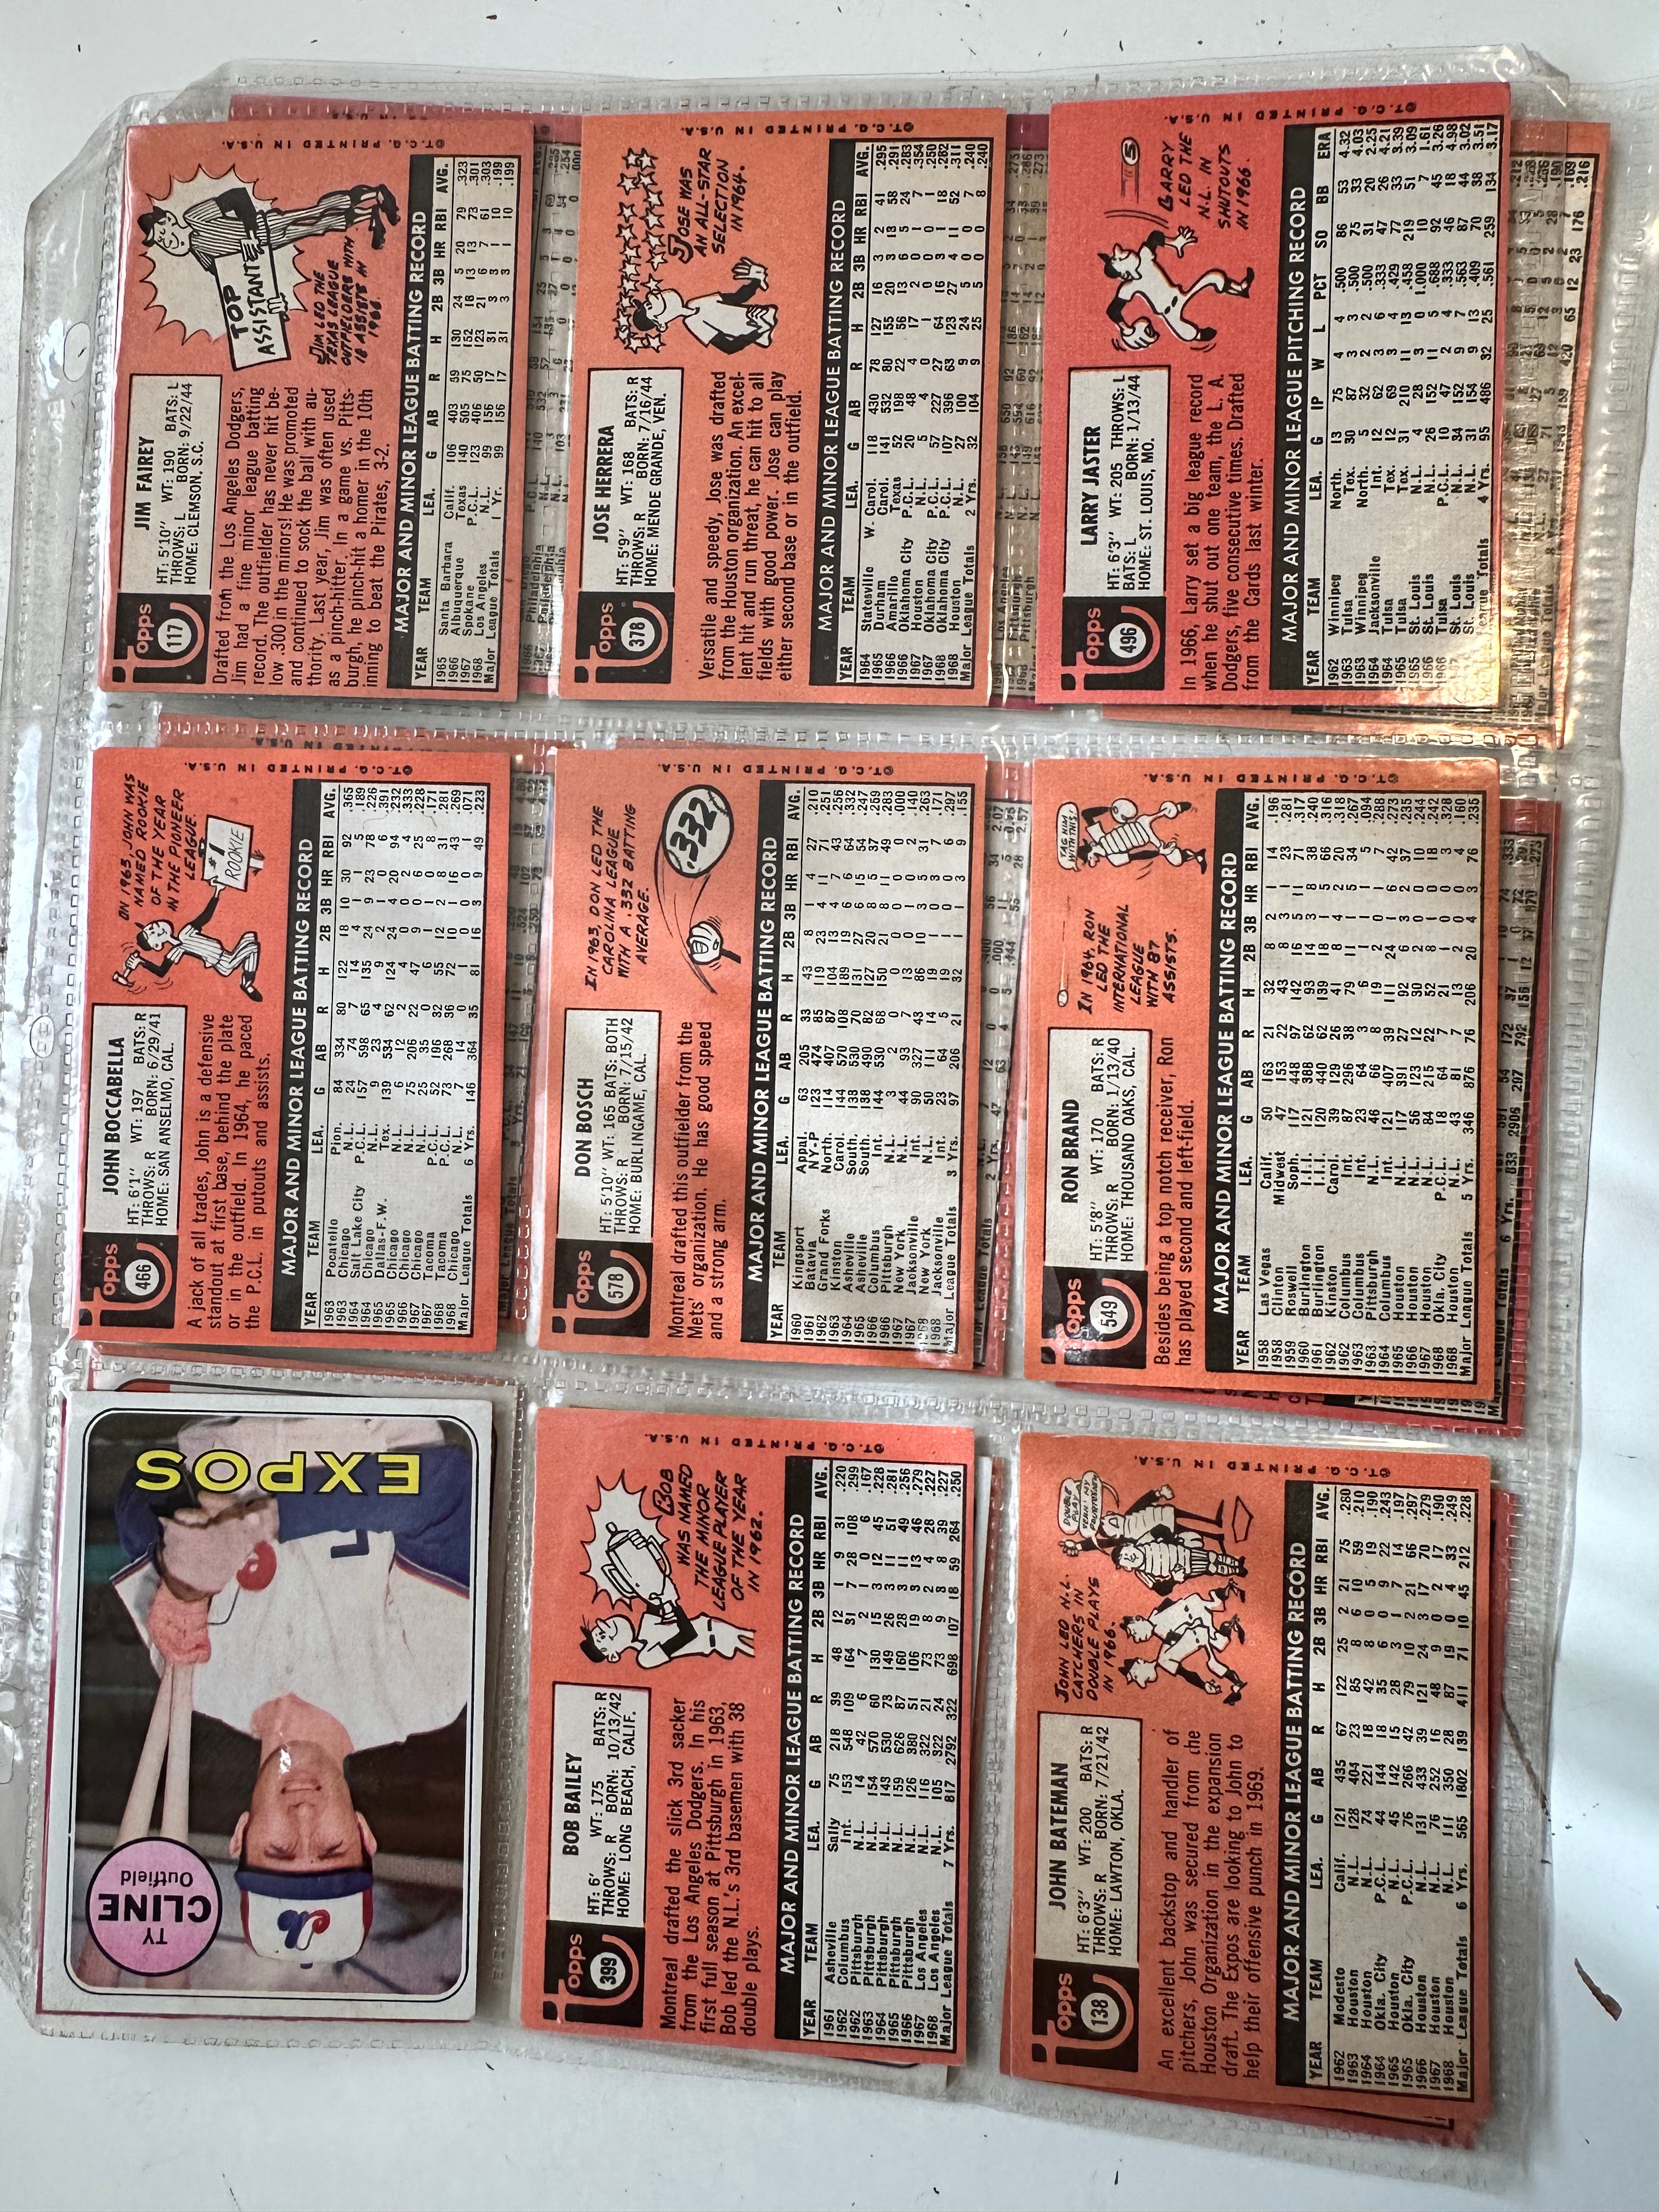 1969 Montreal Expos baseball first year 21 cards lots deal